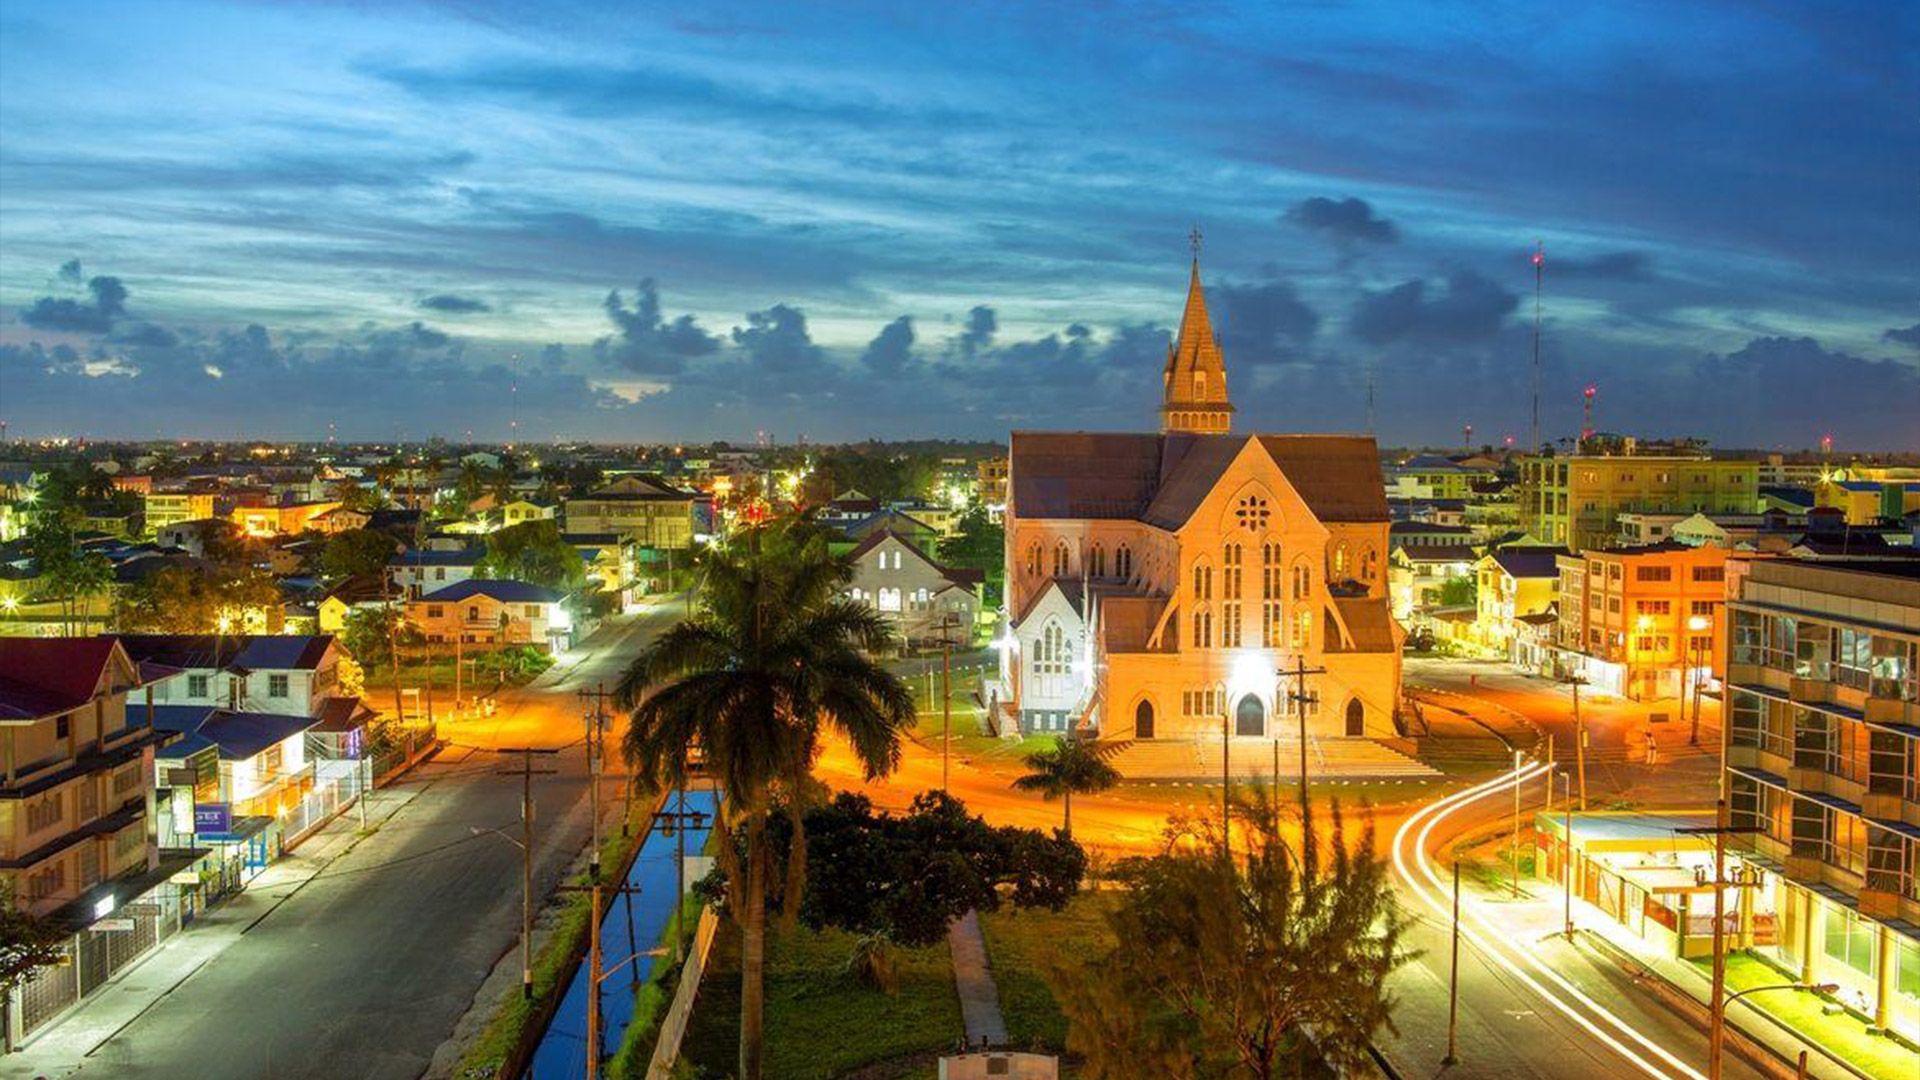 With PayPorter, you can make fast, easy and safe money transfers to Guyana at the most affordable prices!